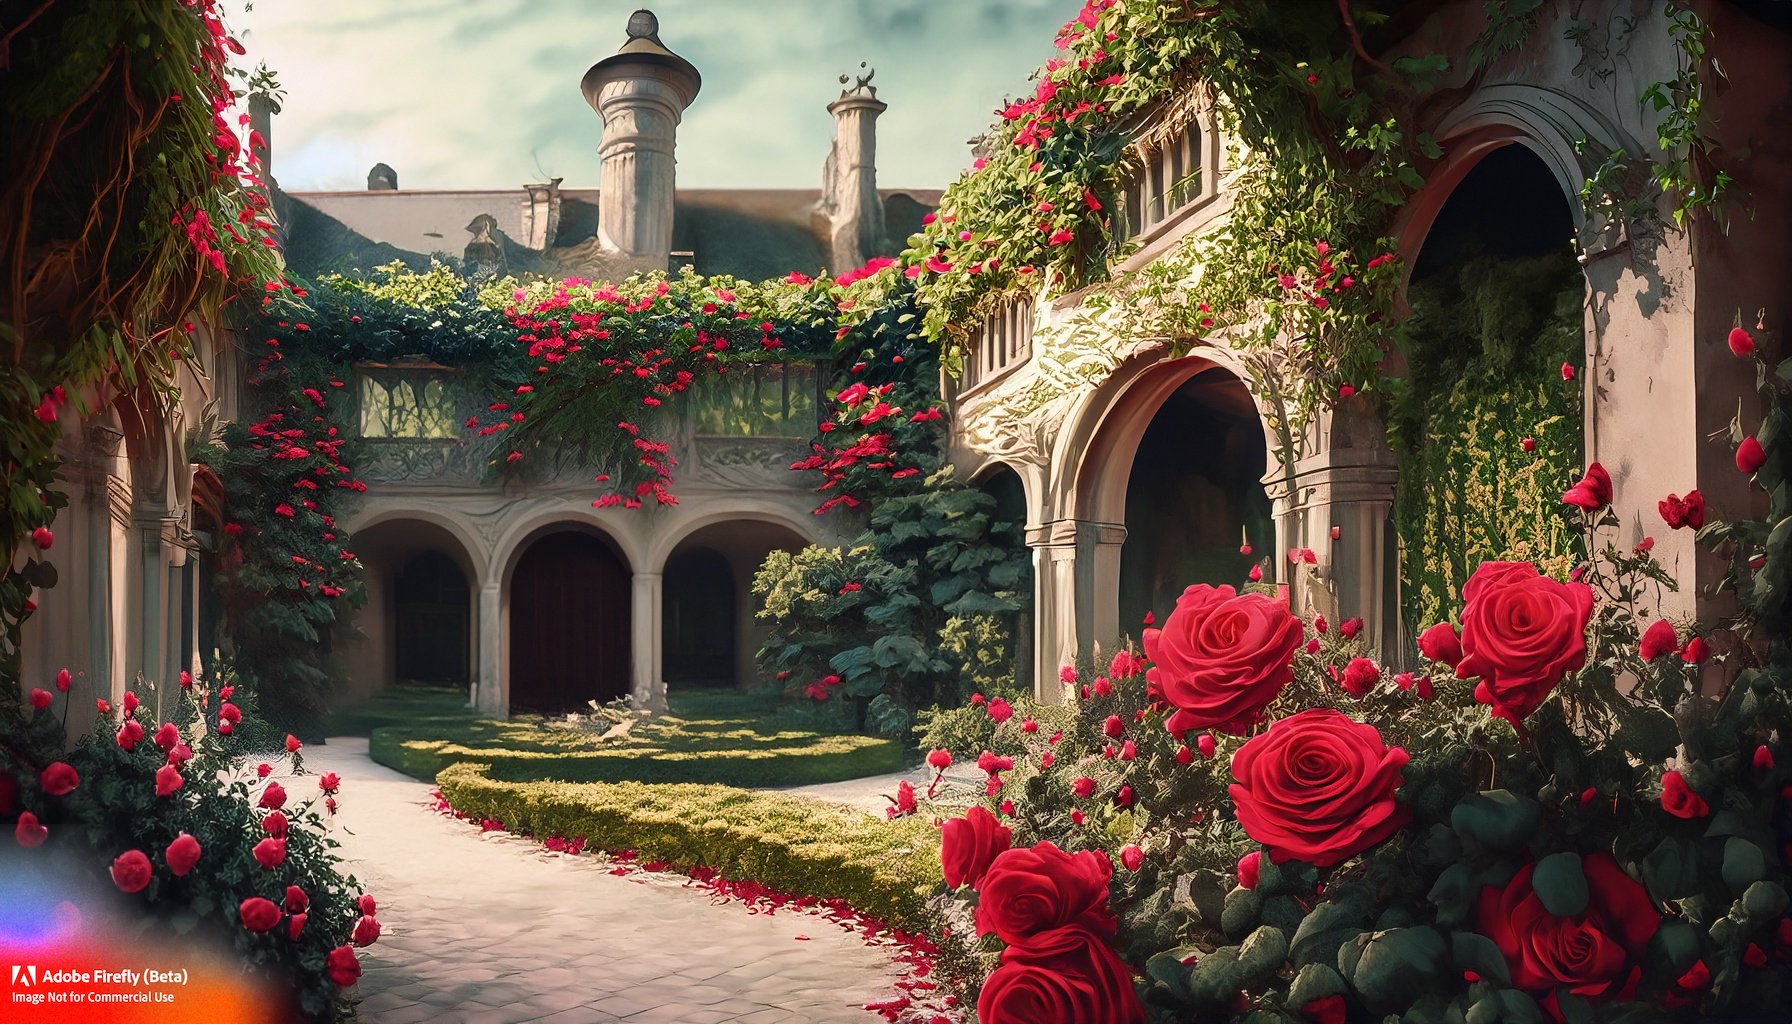 Firefly_a+court of thorns and roses, red roses, mansion with vines, garden courtyard, fairytale vibes_photo_47407.jpg